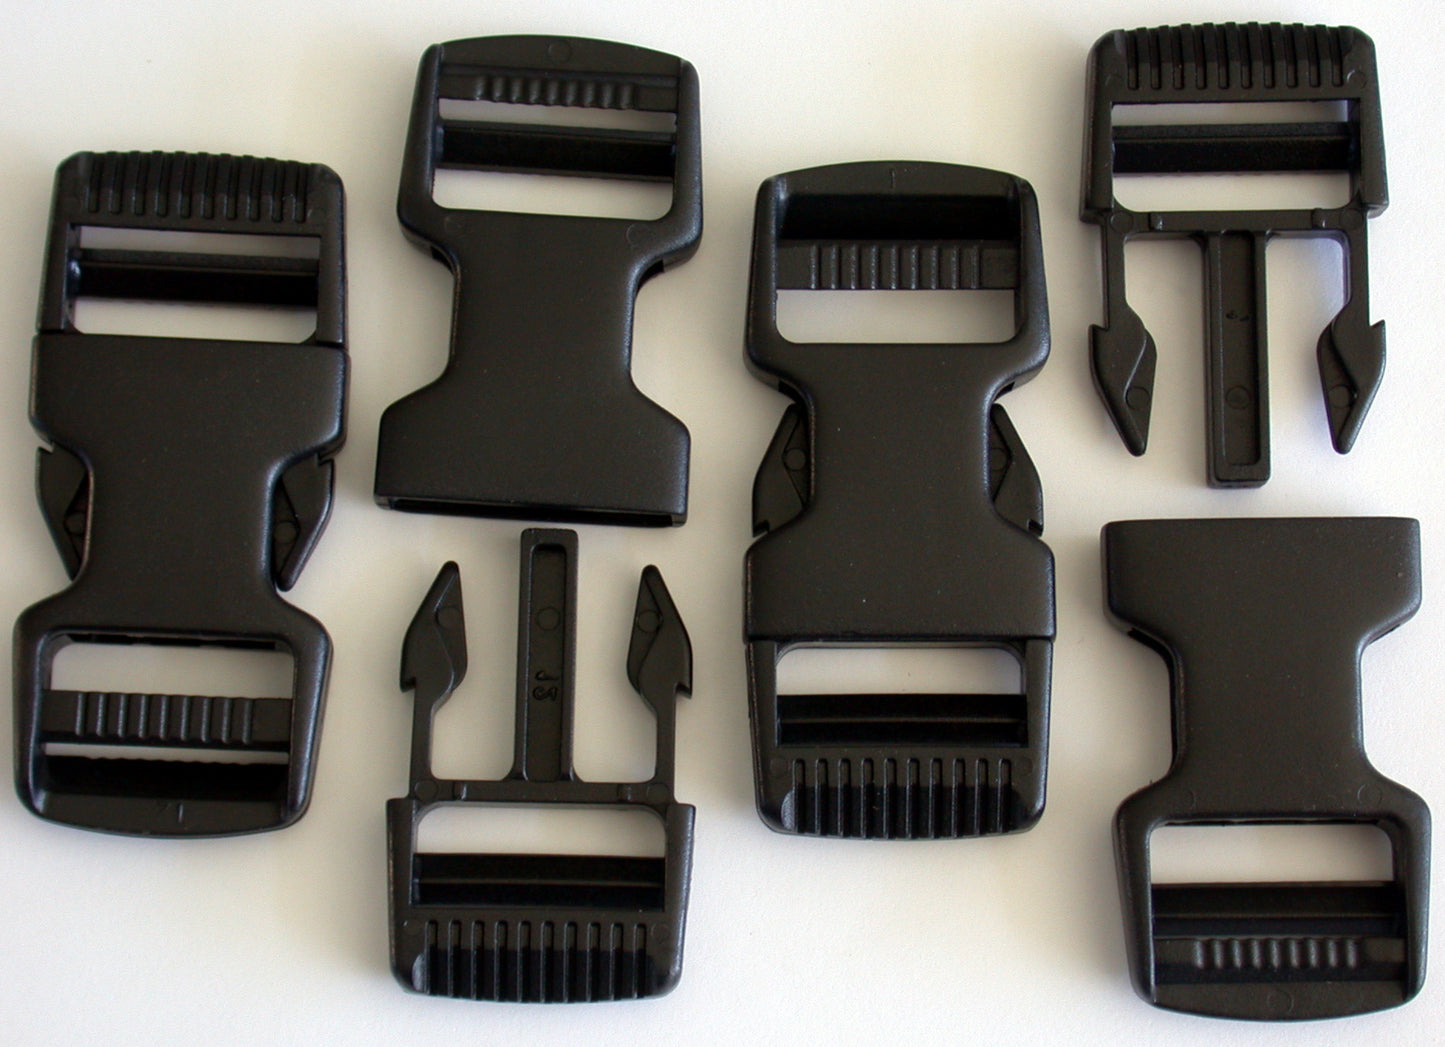 SR1- A set of 4 plastic side release buckles use on 1-inch webbing boundary kits